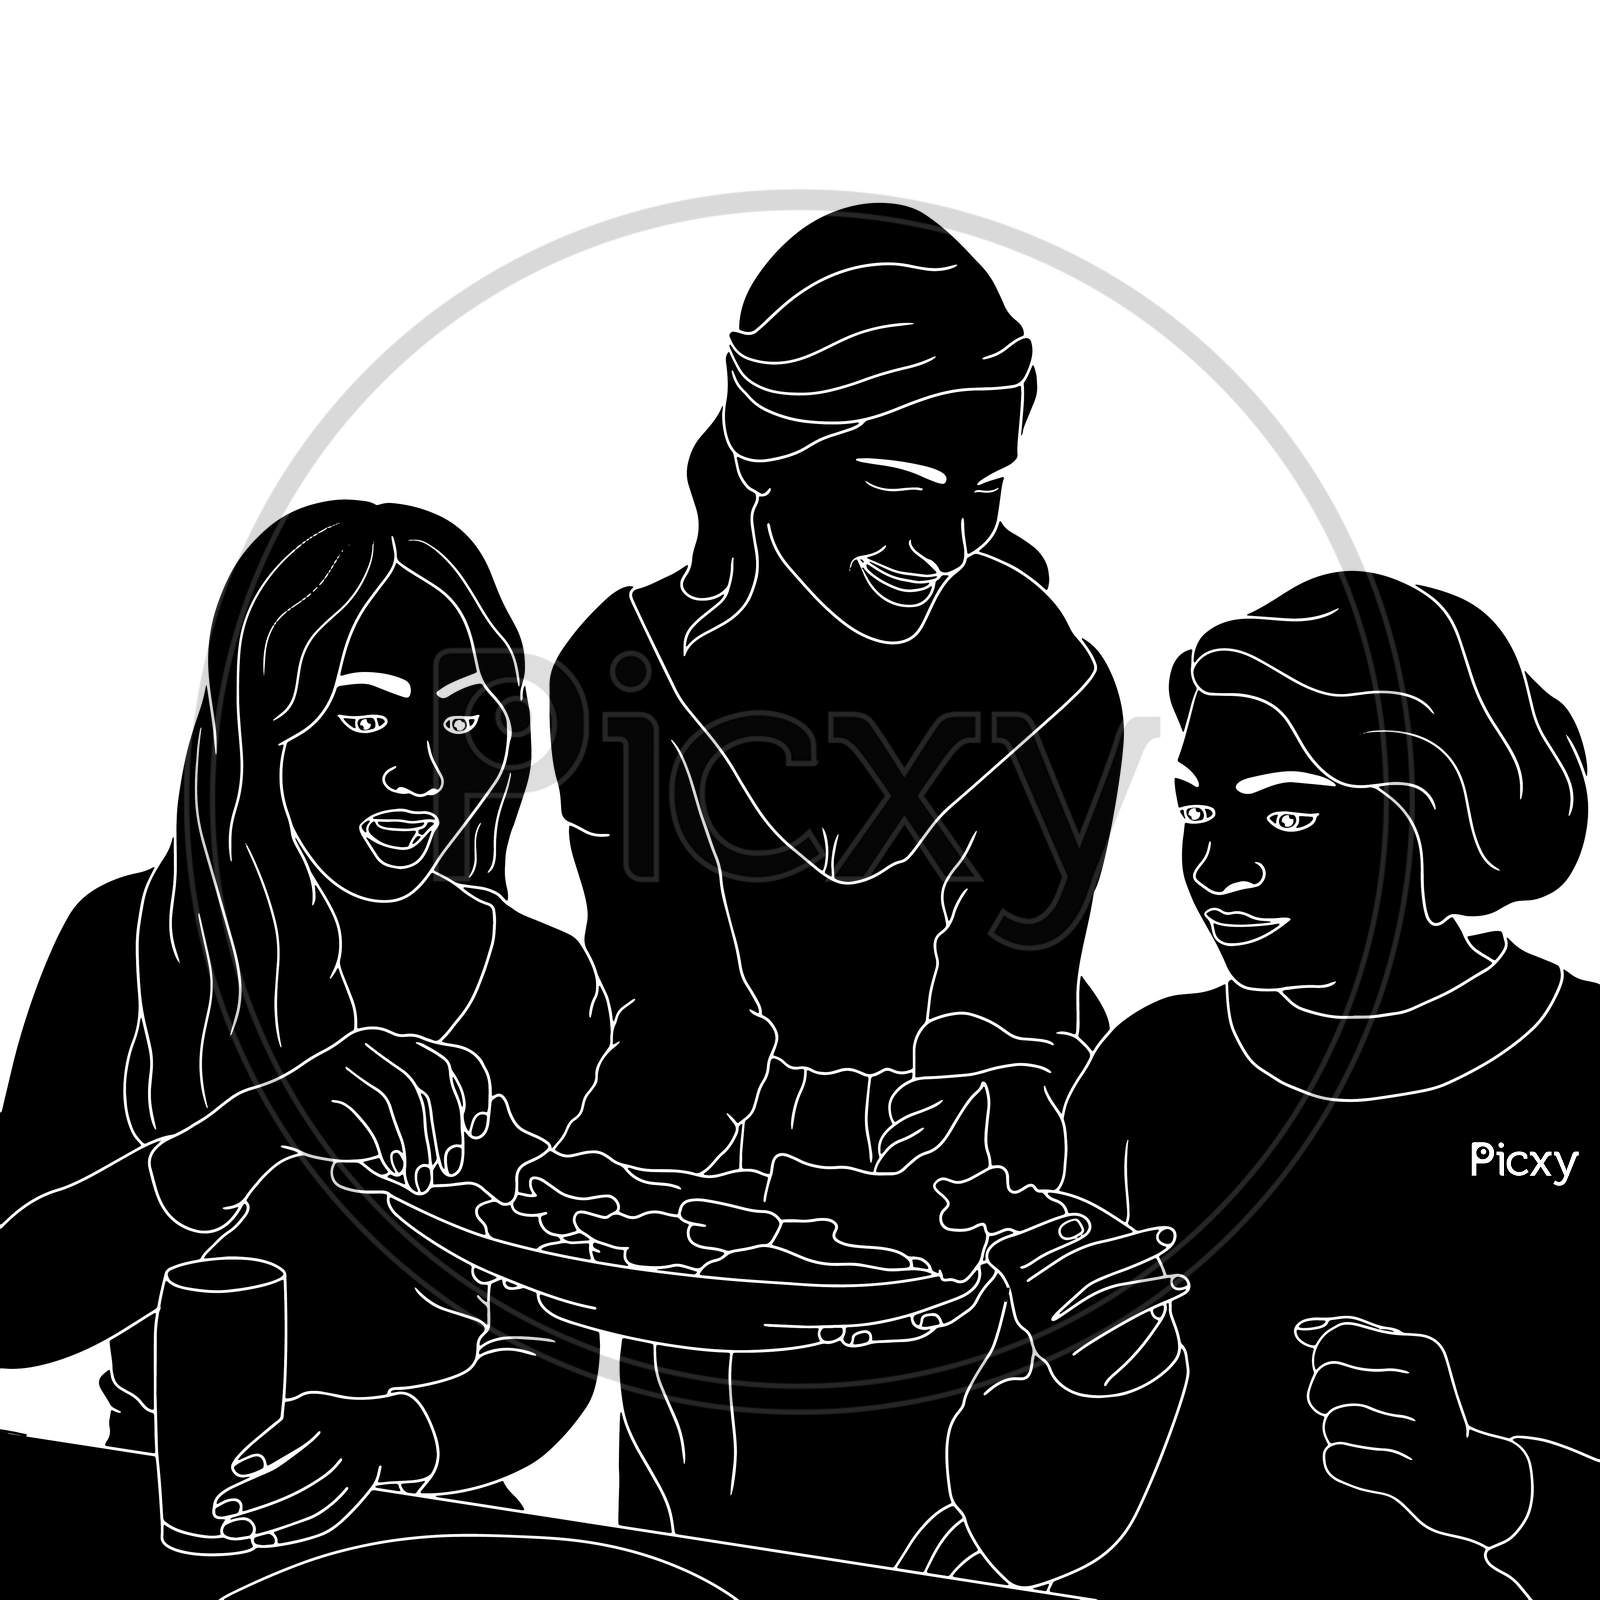 A Group Of Friends Having Fun At The Dining Table, Friendship Treat, The Silhouette Of People For Friendship Day. Hand-Drawn Character Illustration Of Happy People.